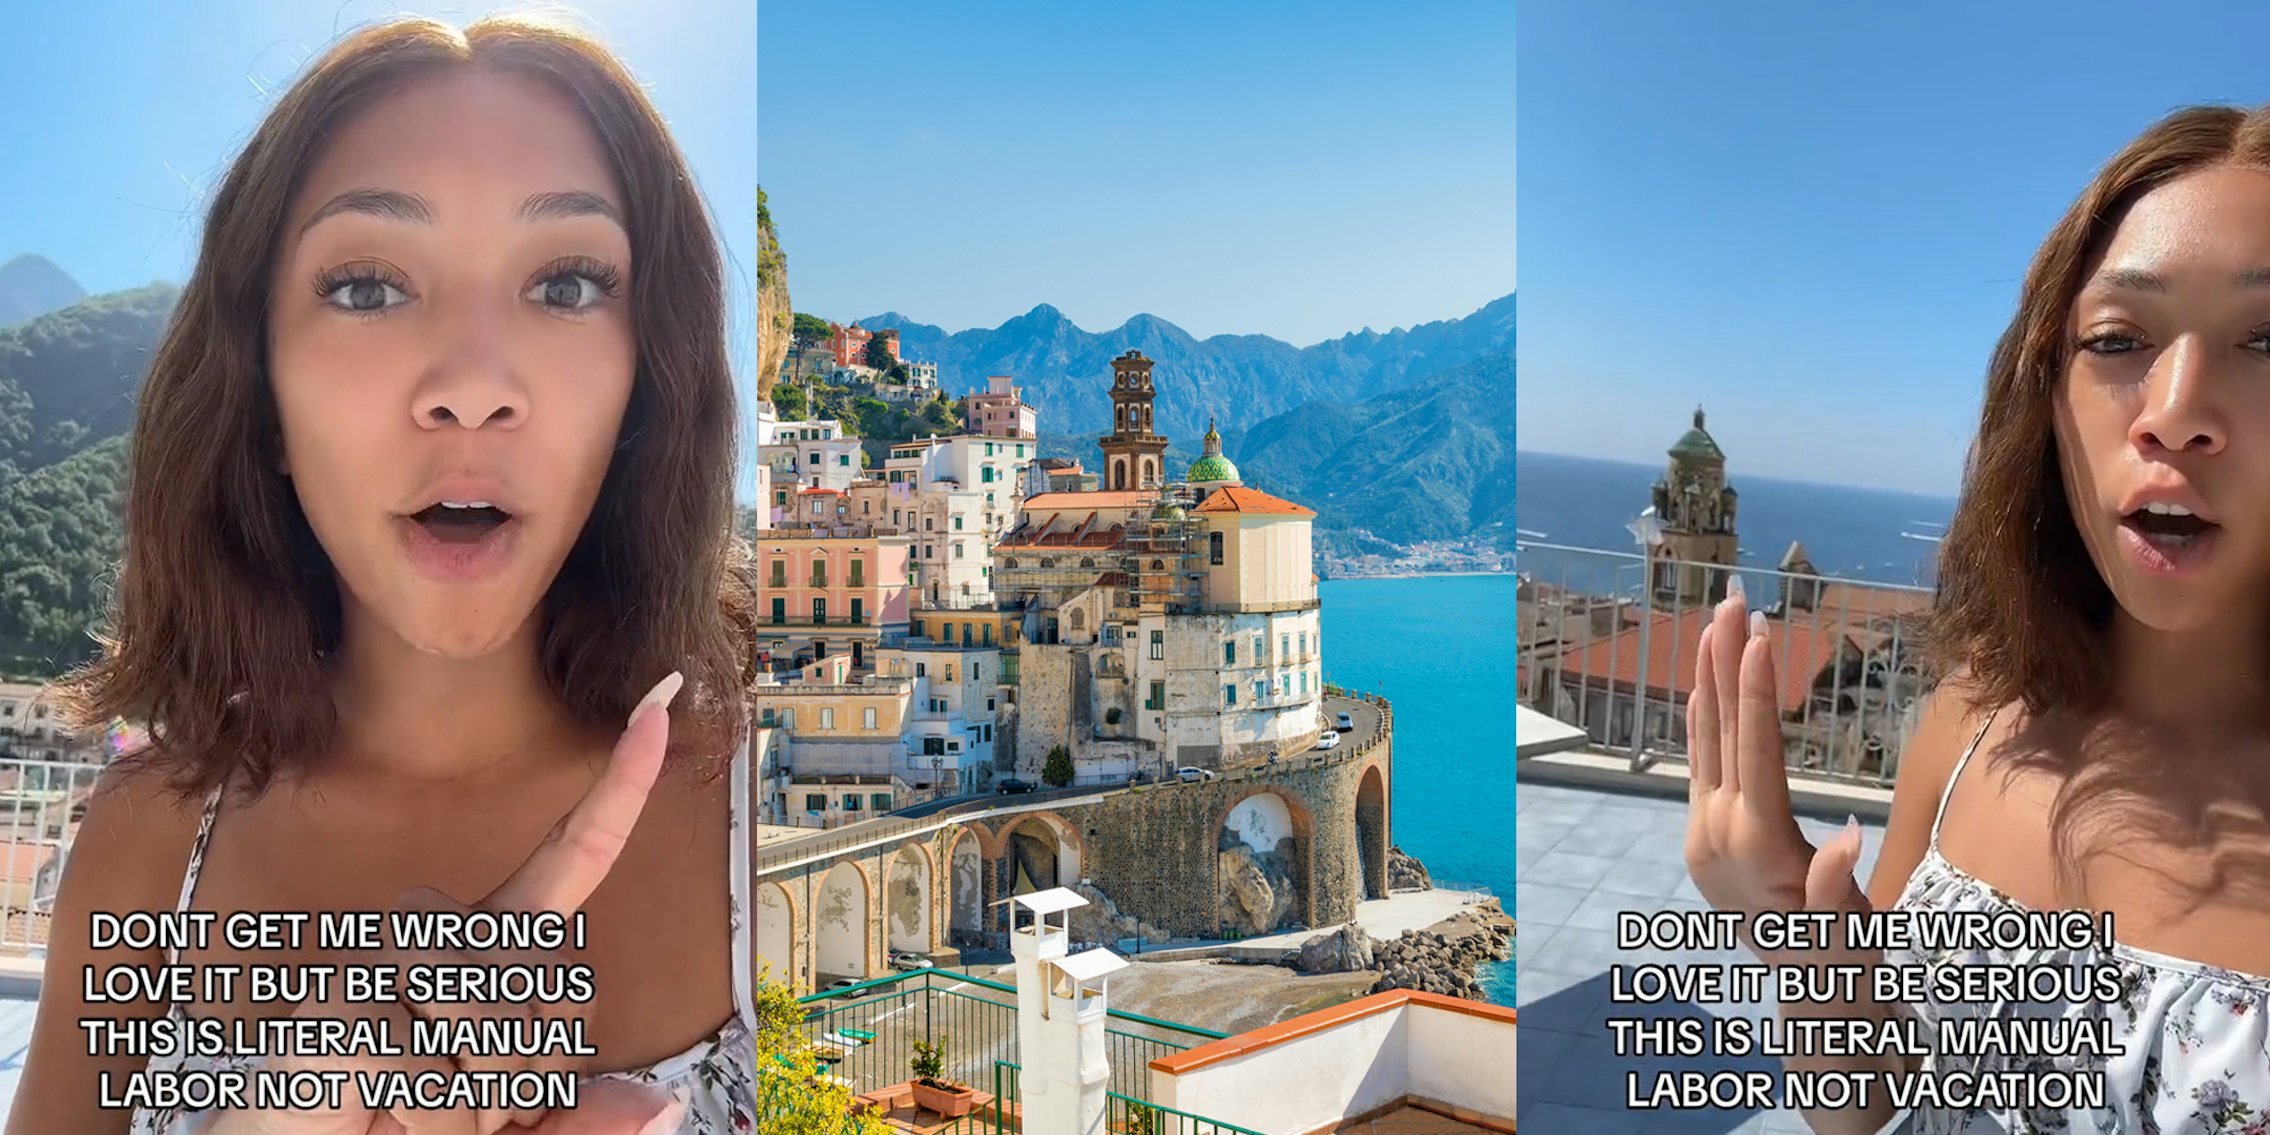 travel influencer speaking outside with caption 'DONT GET ME WRONG I LOVE IT BUT BE SERIOUS THIS IS LITERAL MANUAL LABOR NOT VACATION' (l) Amalfi Coast with small city (c) travel influencer speaking outside with caption 'DONT GET ME WRONG I LOVE IT BUT BE SERIOUS THIS IS LITERAL MANUAL LABOR NOT VACATION' (r)